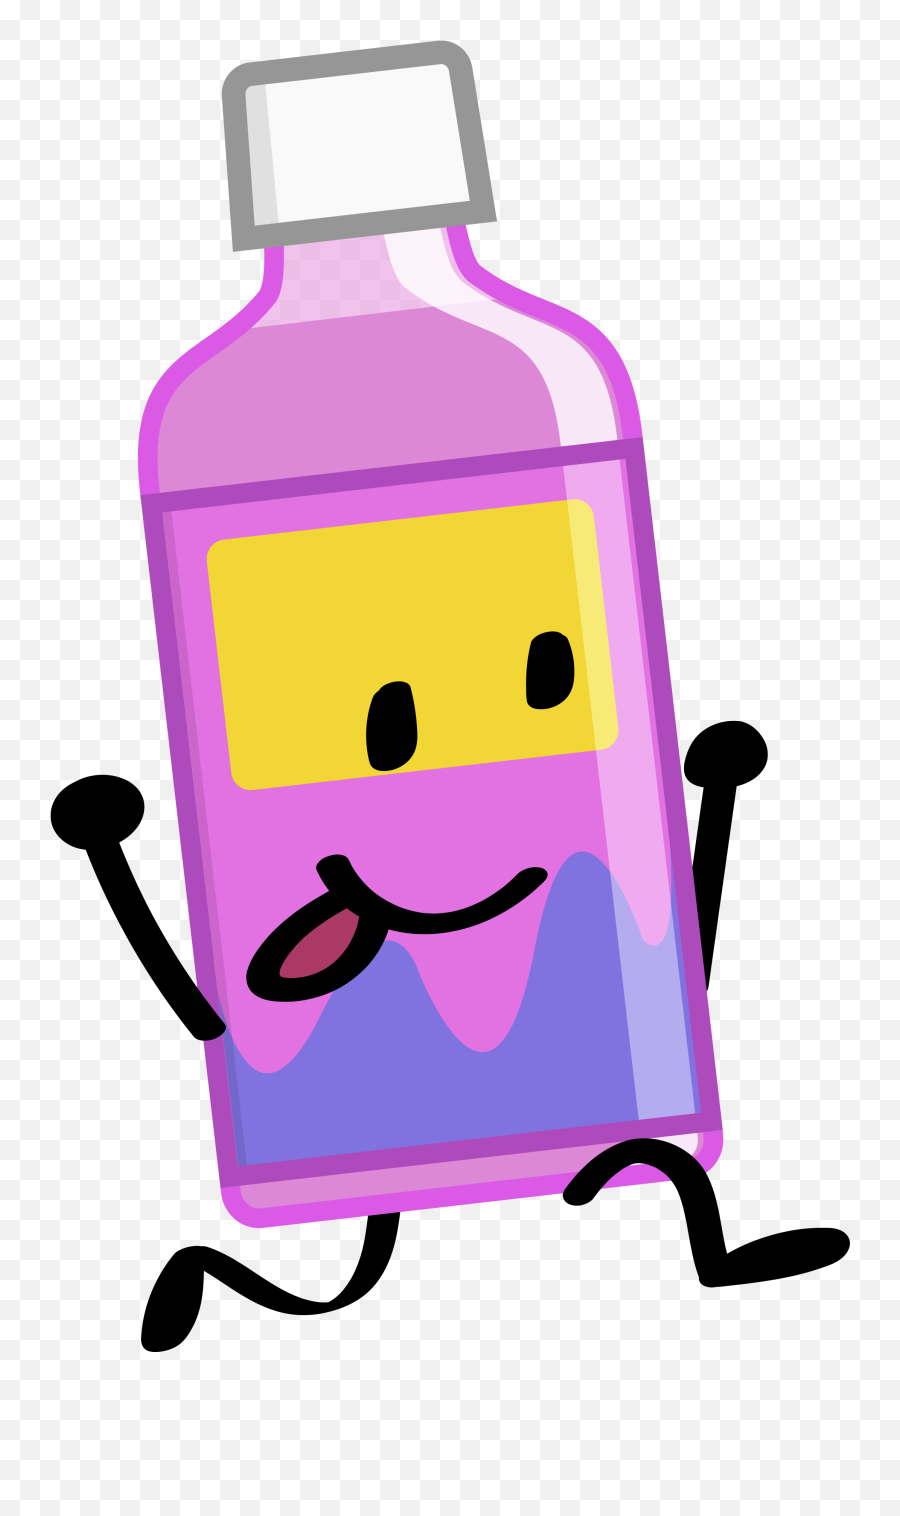 I Tried Its Pepto Bismol But I Think I Messed Up The Asset - Happy Emoji,Give Emoticon